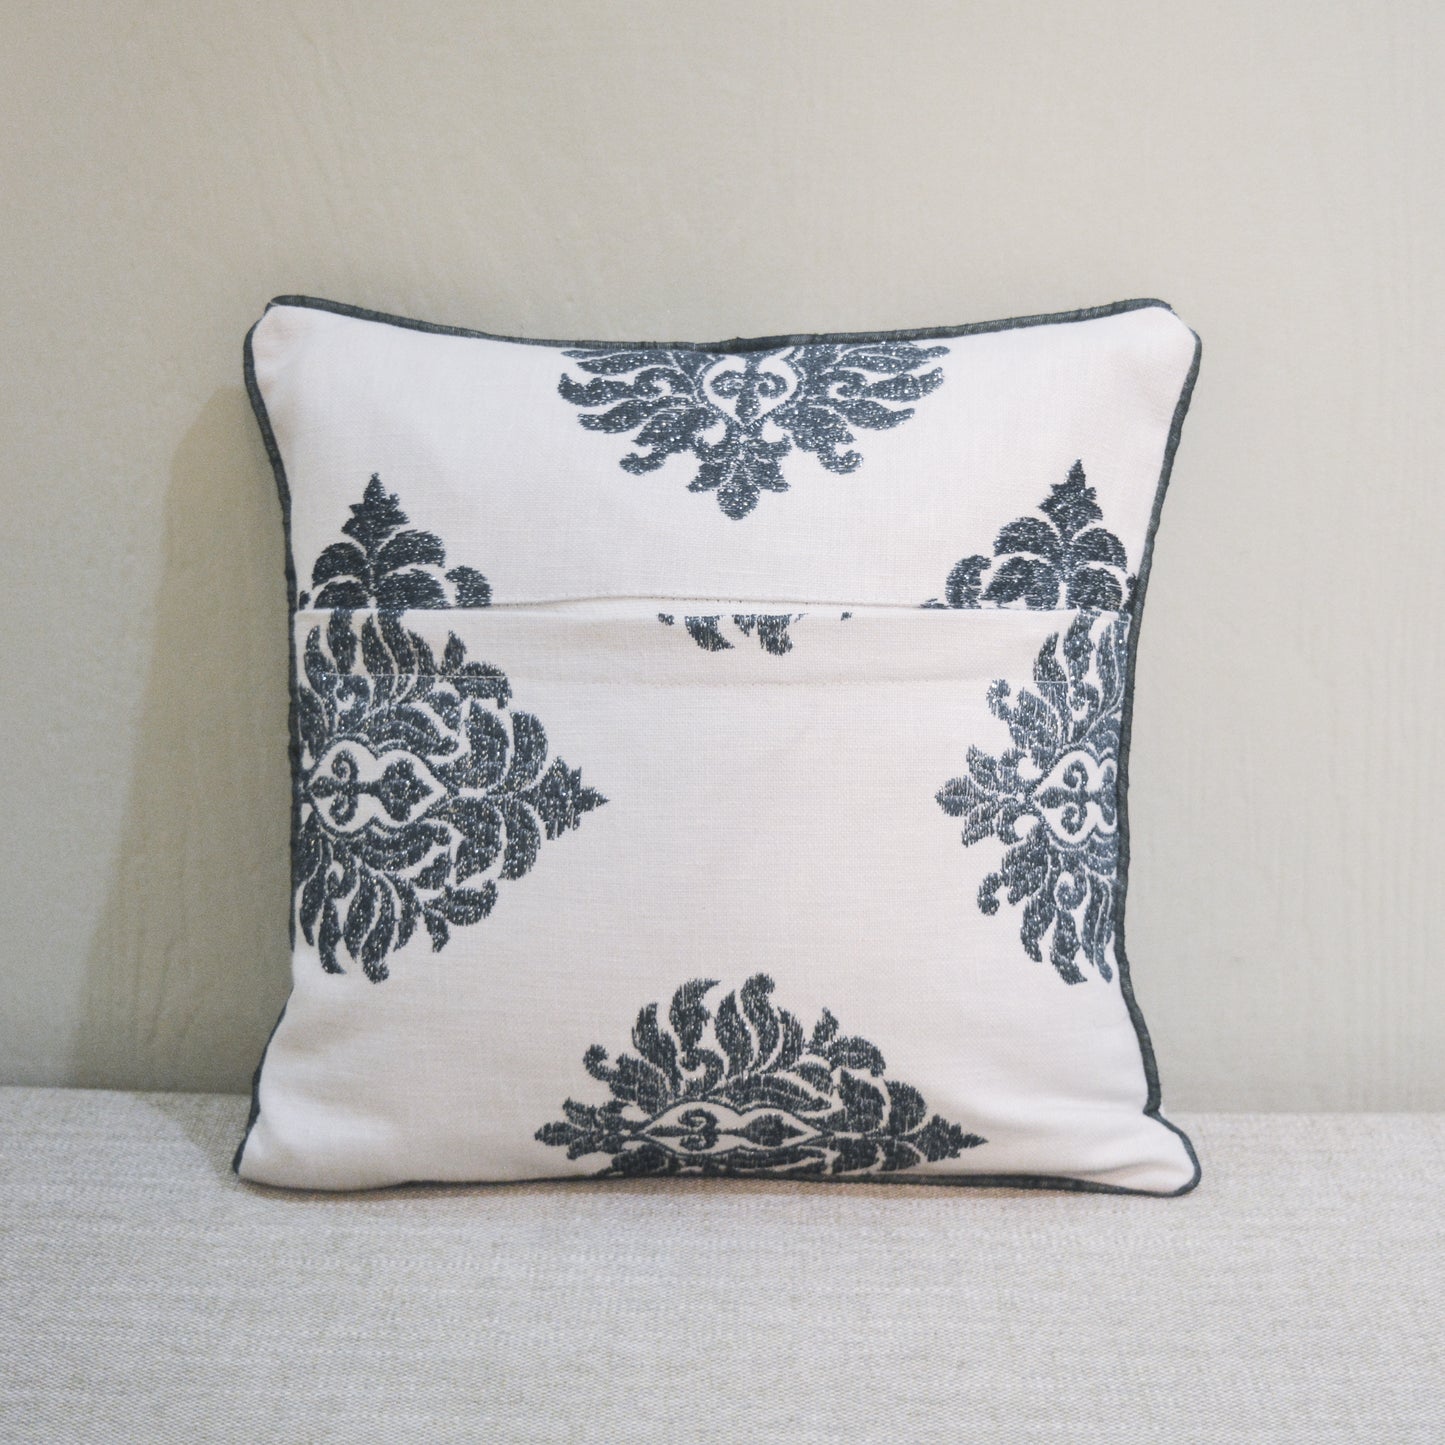 Imperial beauty All-Over Embroidered Cushion Cover 12" x 12"